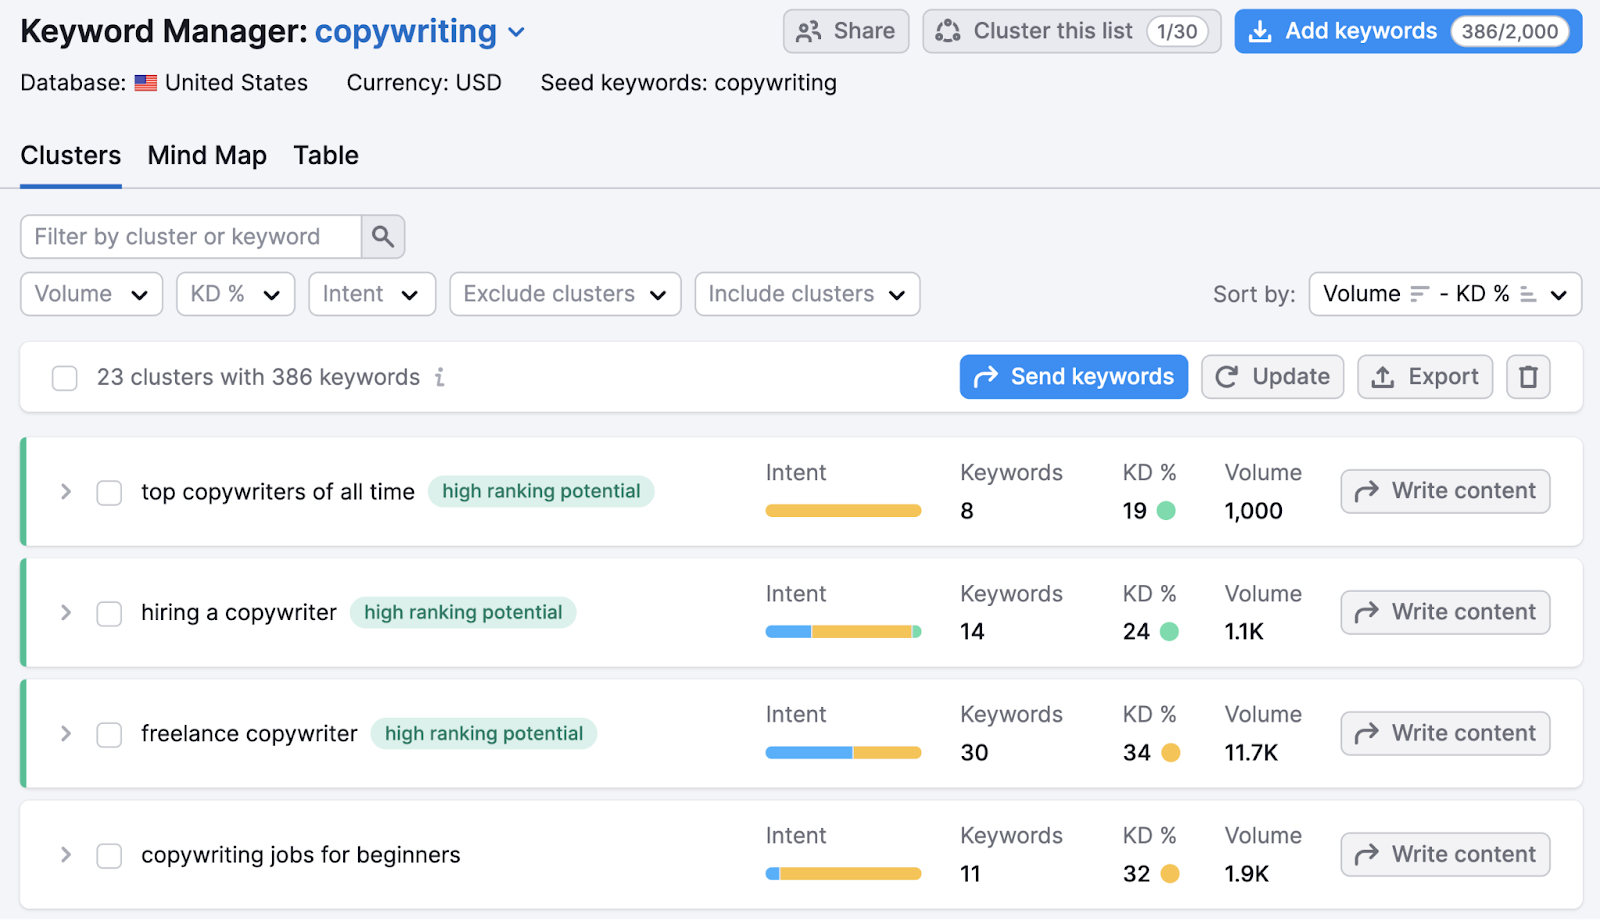 Keyword Manager results for "copywriting"